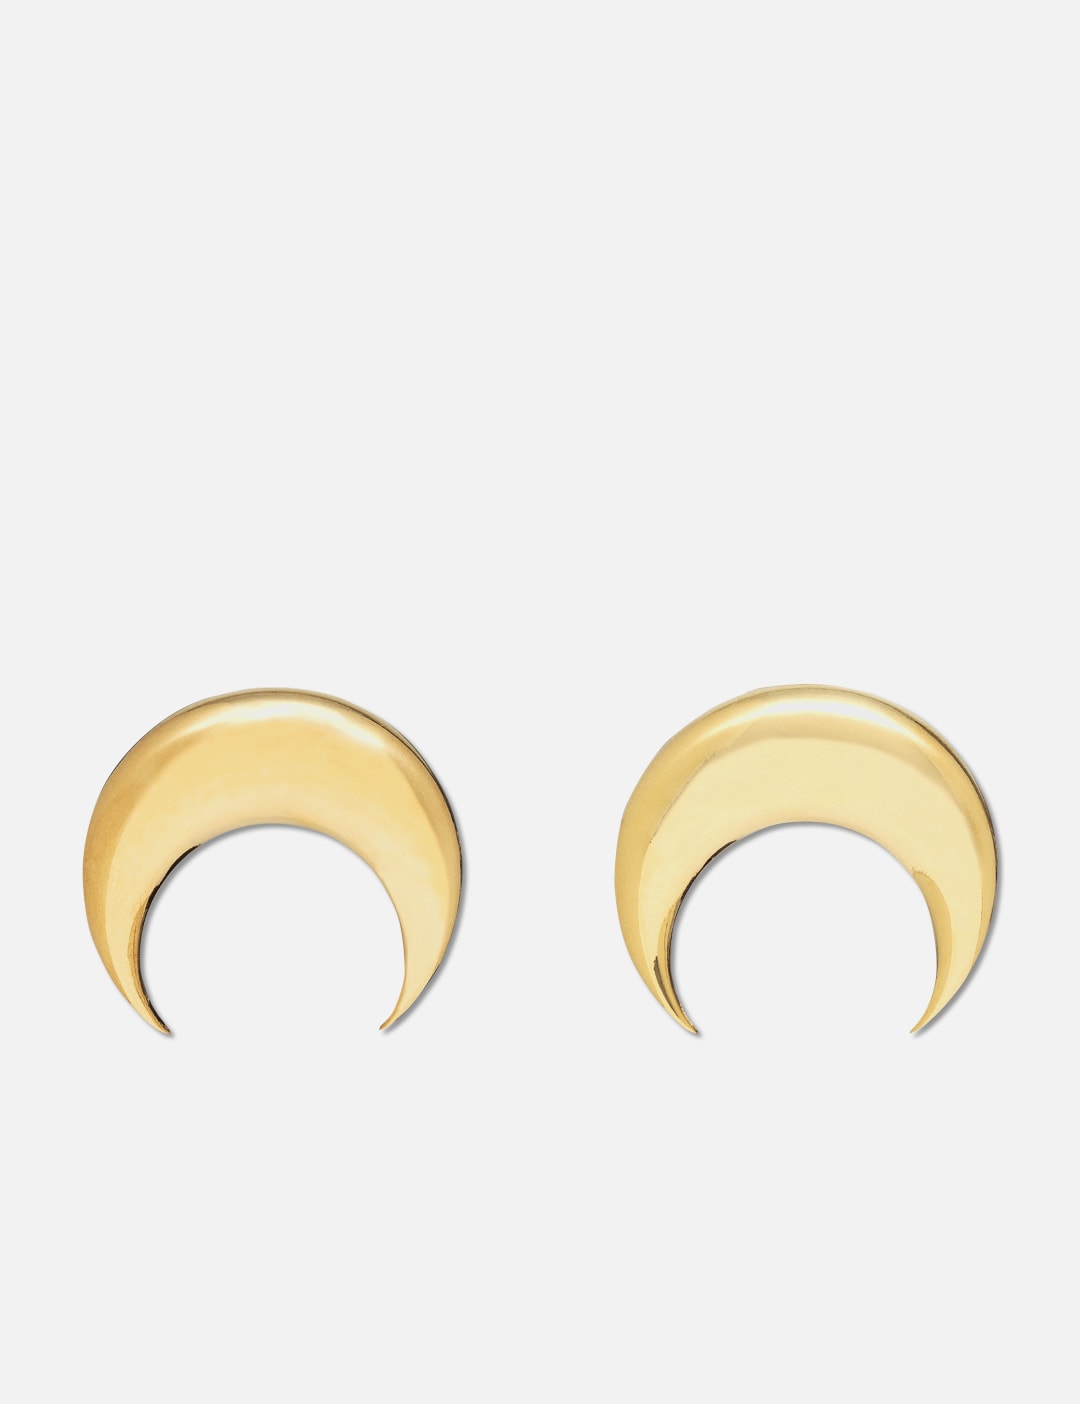 Marine Serre - Moon Earring | HBX - Globally Curated Fashion and ...